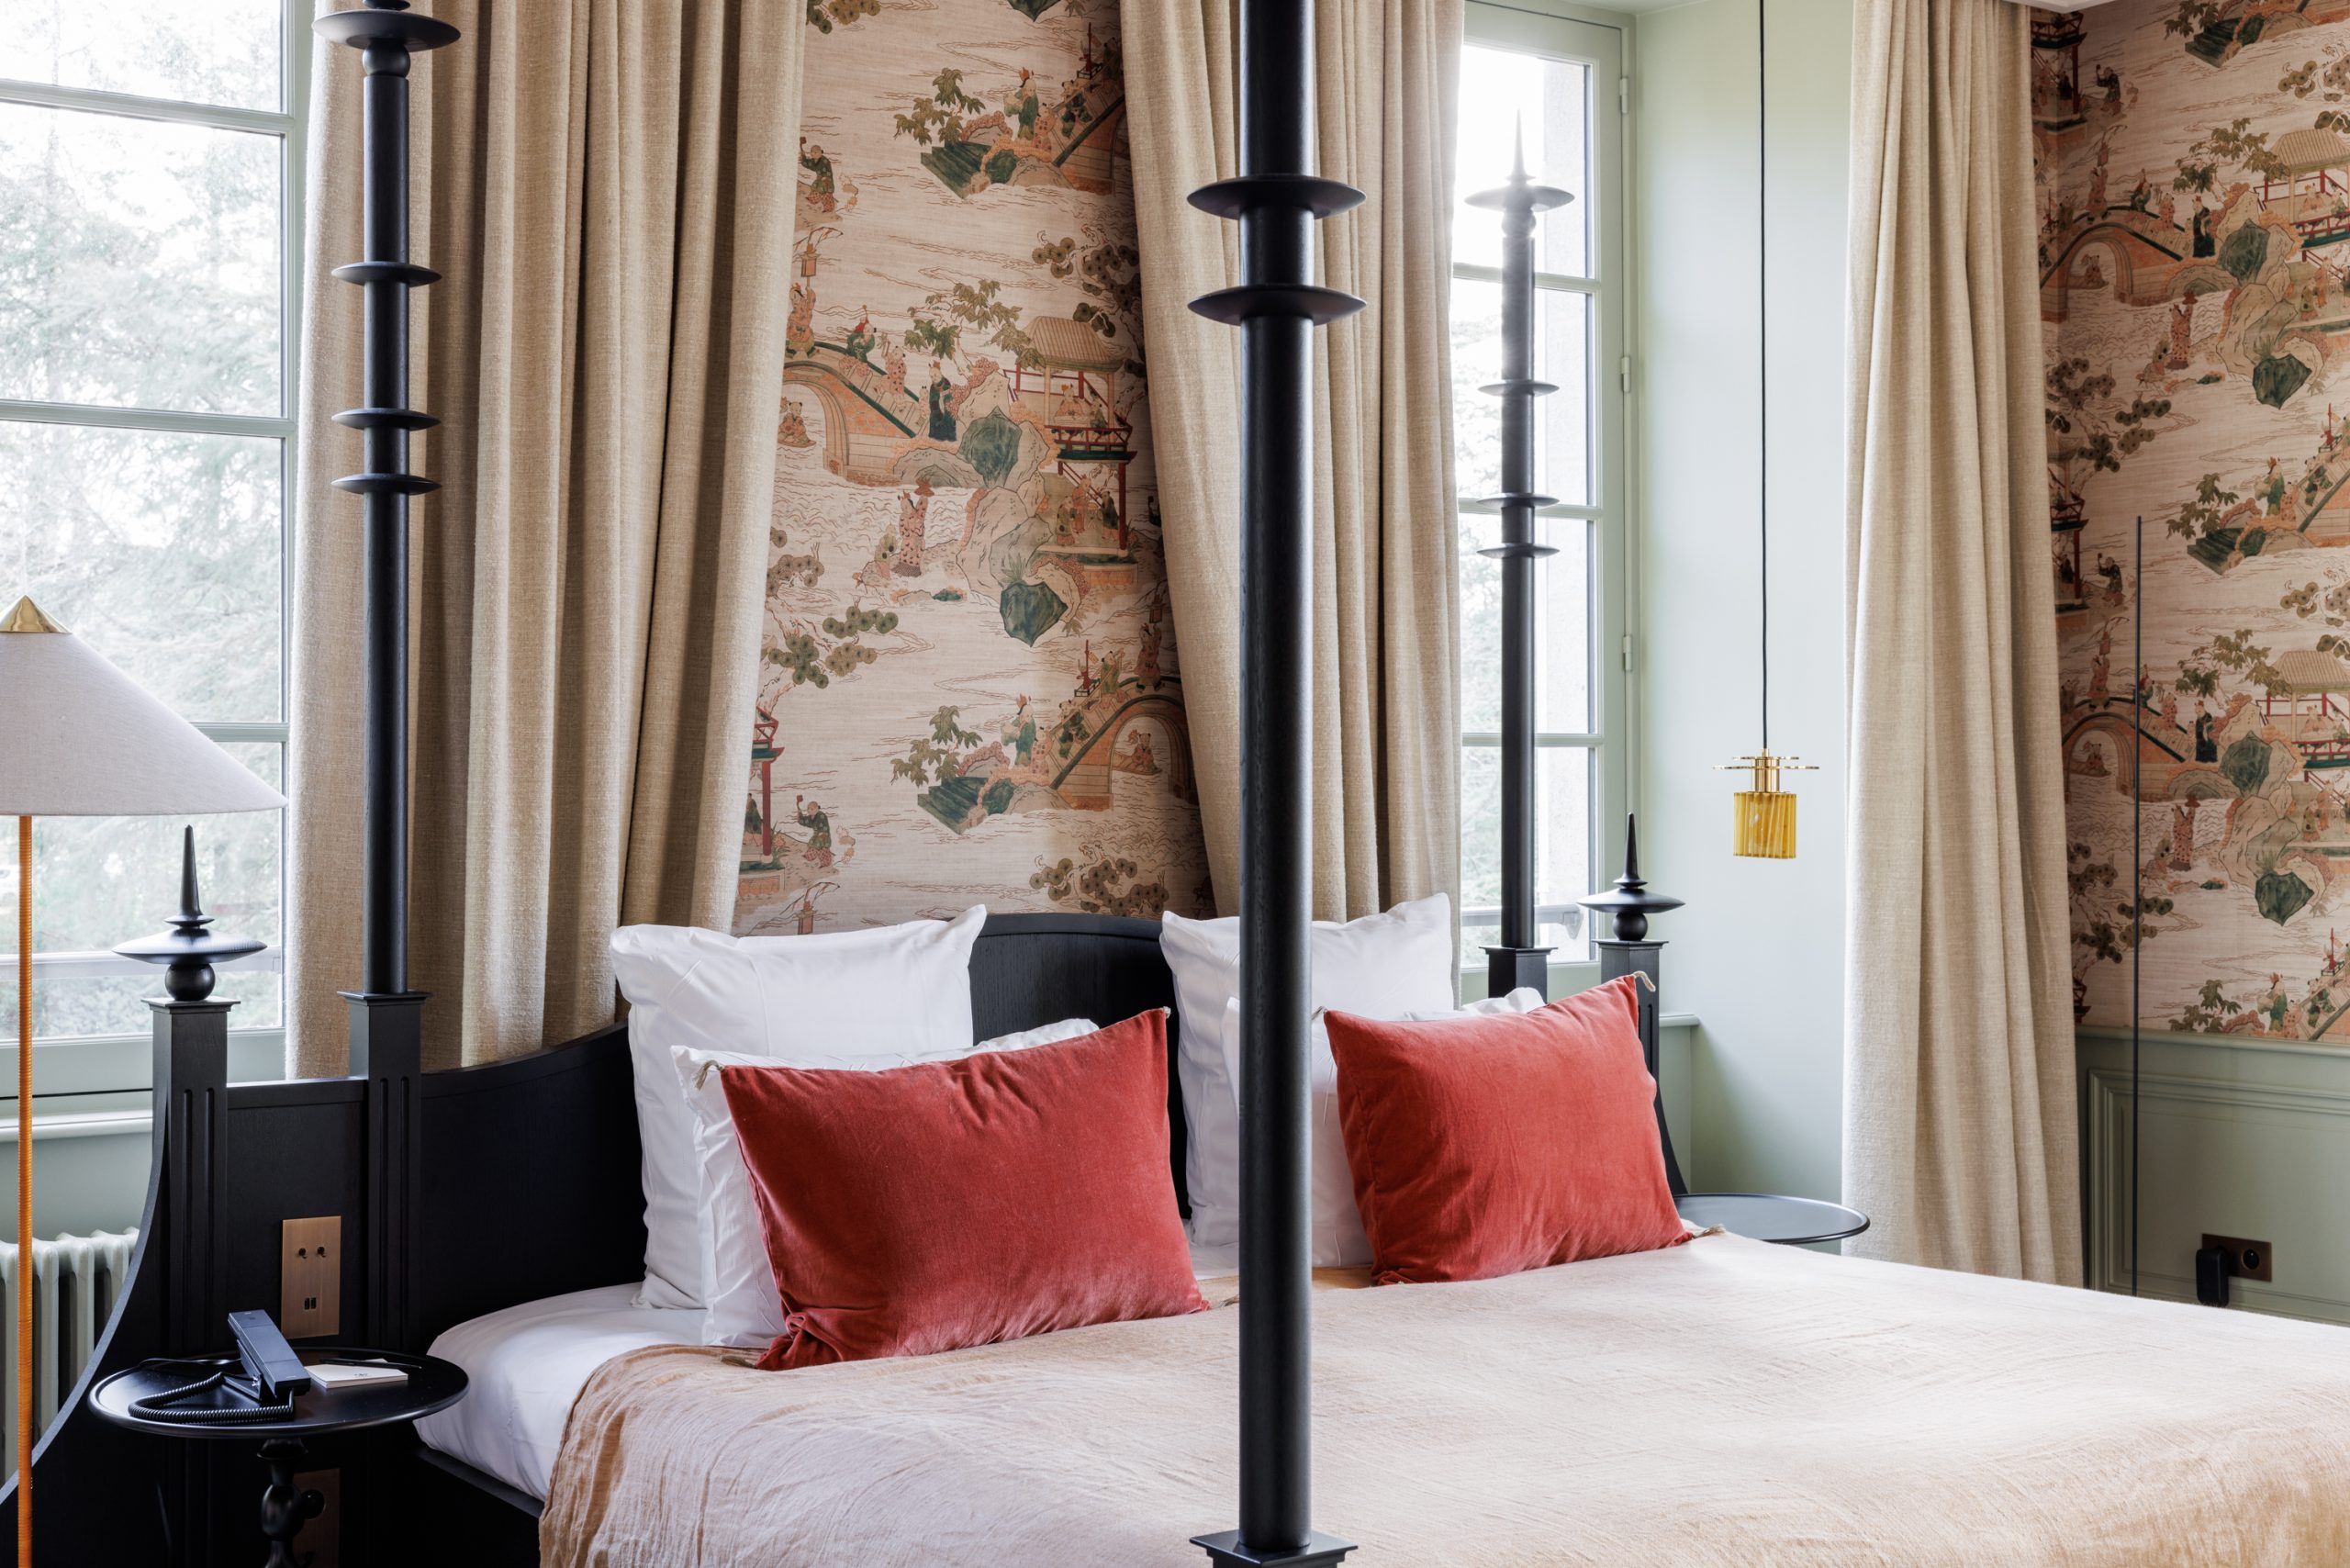 Canopy bedroom, patterned curtains, modern style - relais et chateaux bretagne